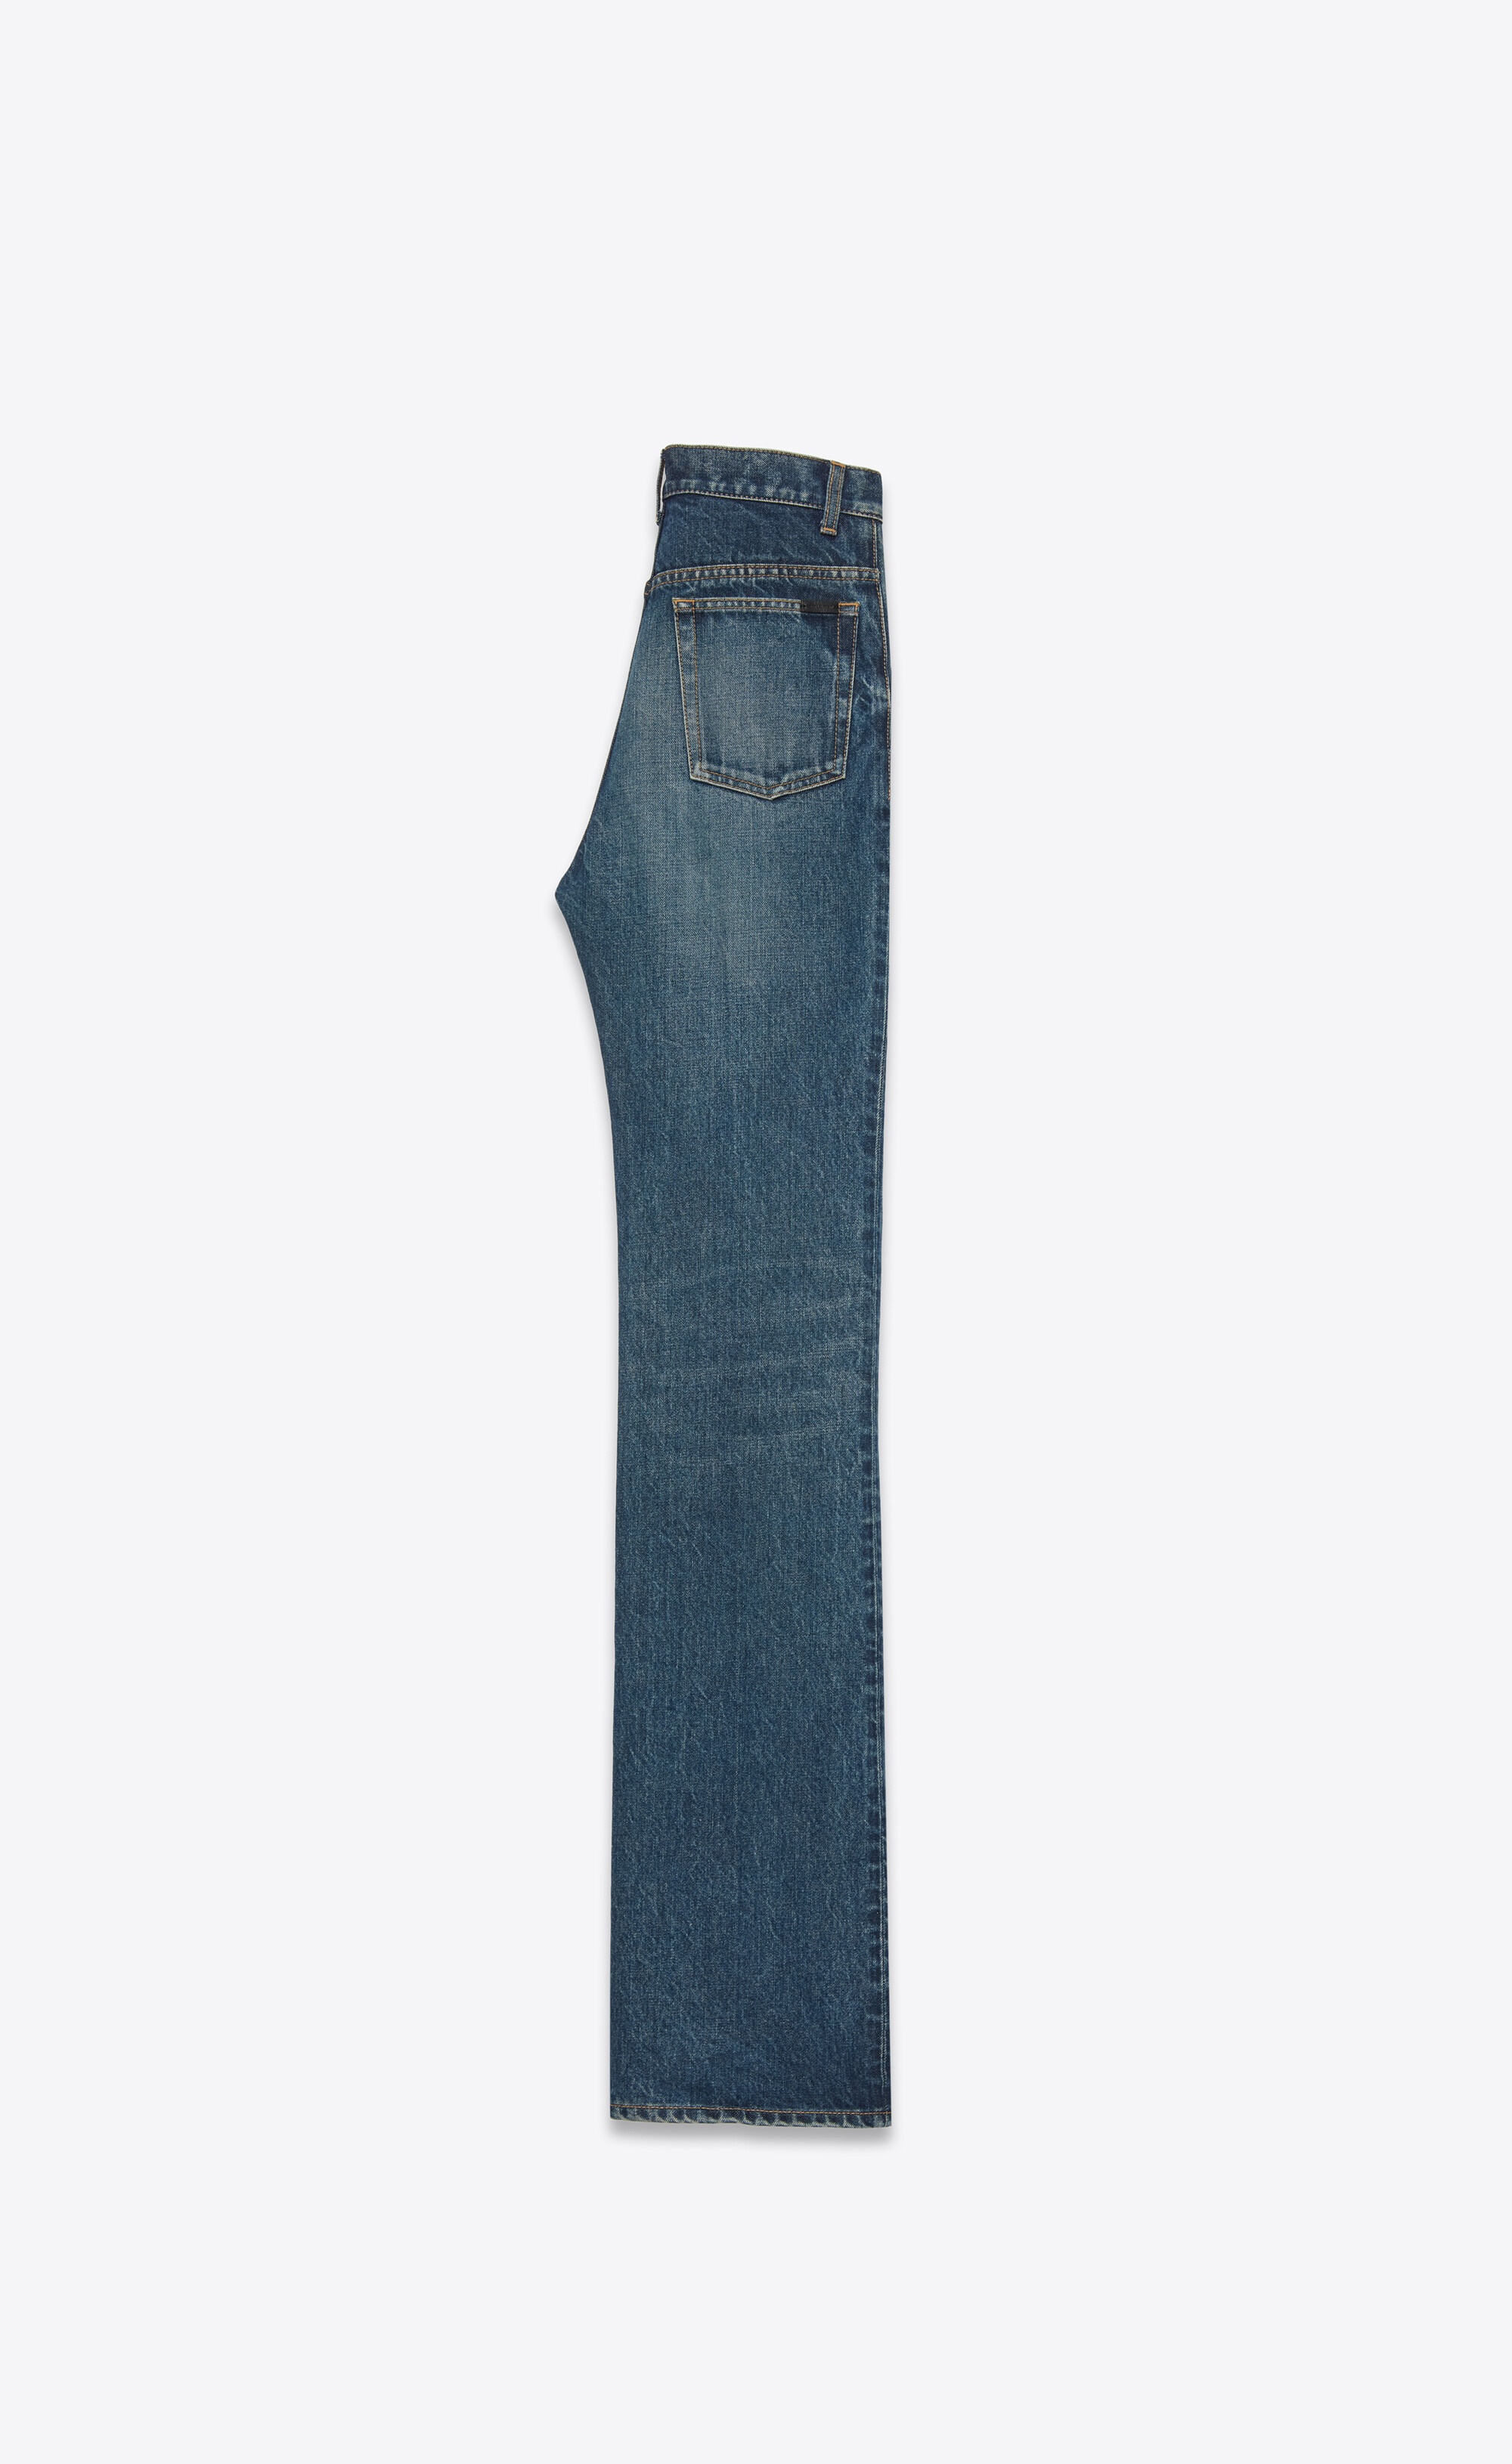 clyde jeans in august blue denim - 2